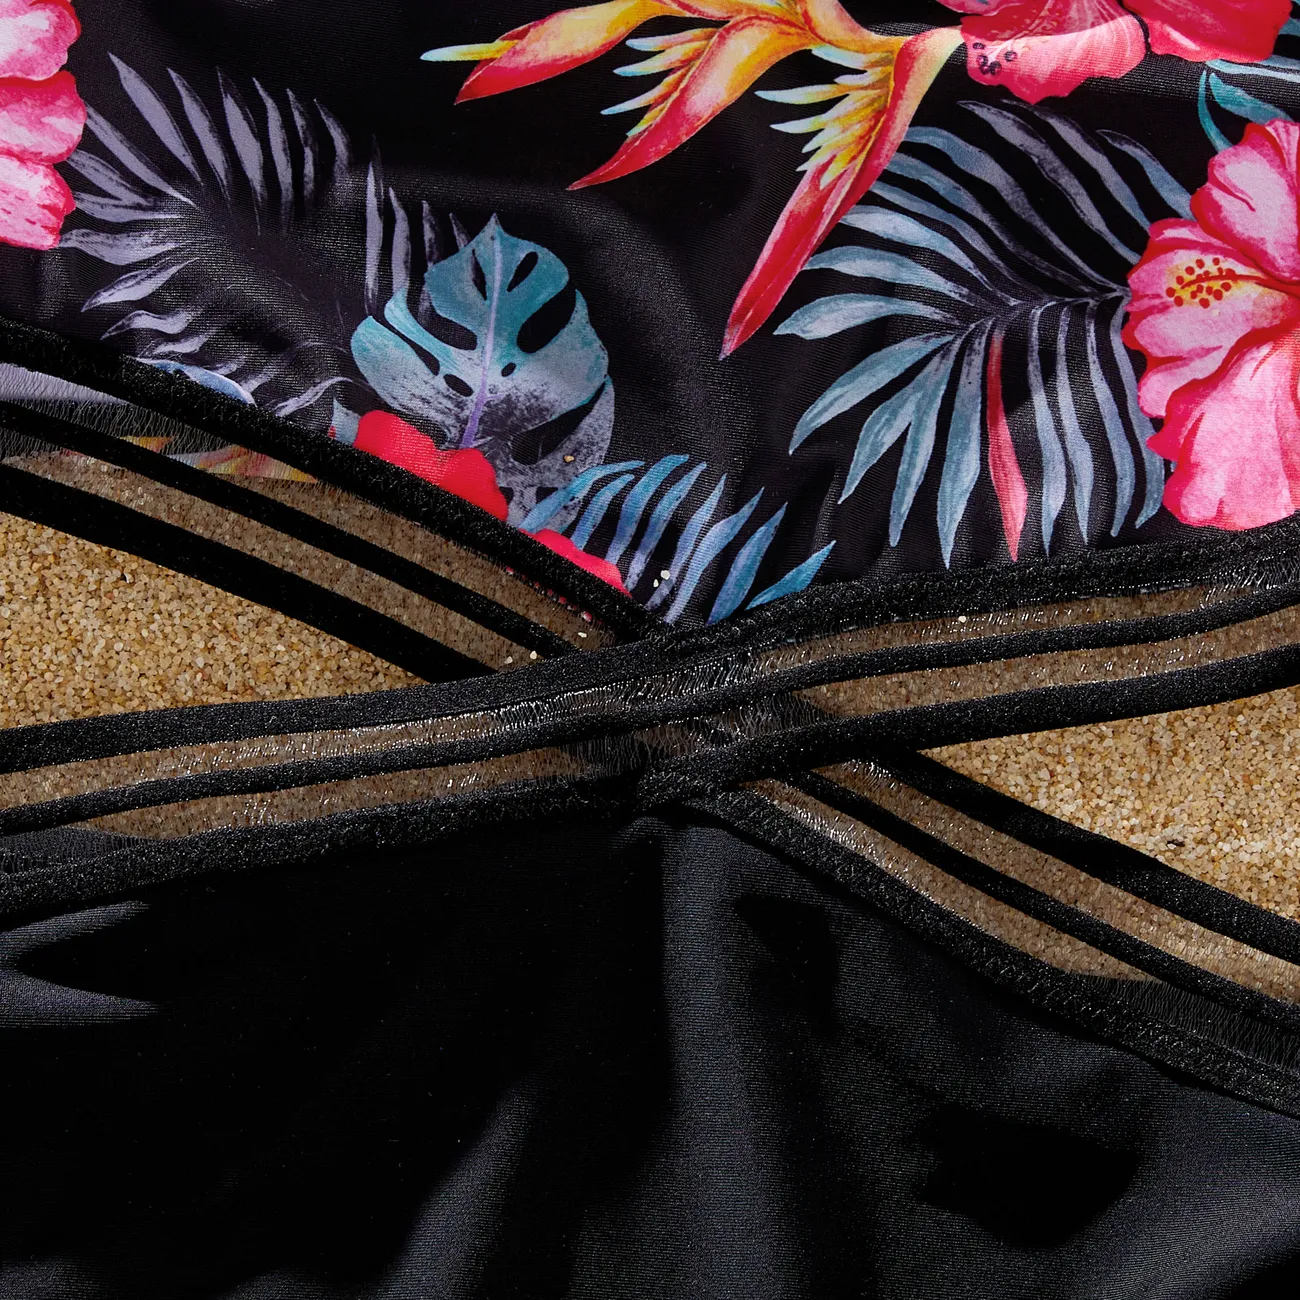 Family Matching Tropical Floral Drawstring Swim Trunks or Cross Front Flutter Sleeves One-Piece Swimsuit Black big image 1